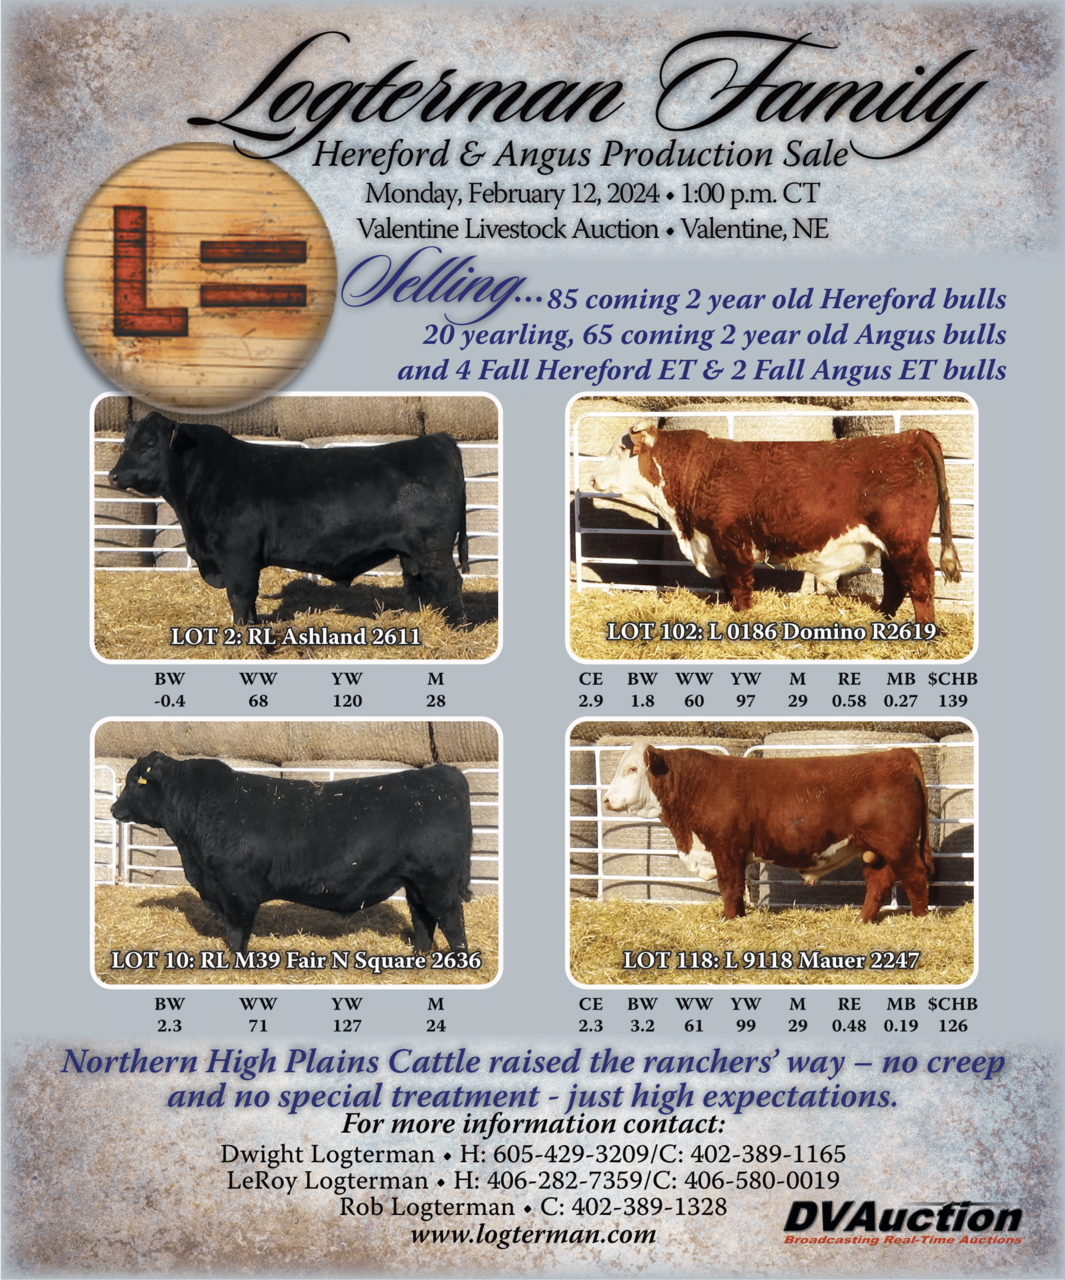 Logterman Family Hereford & Angus Production Sale